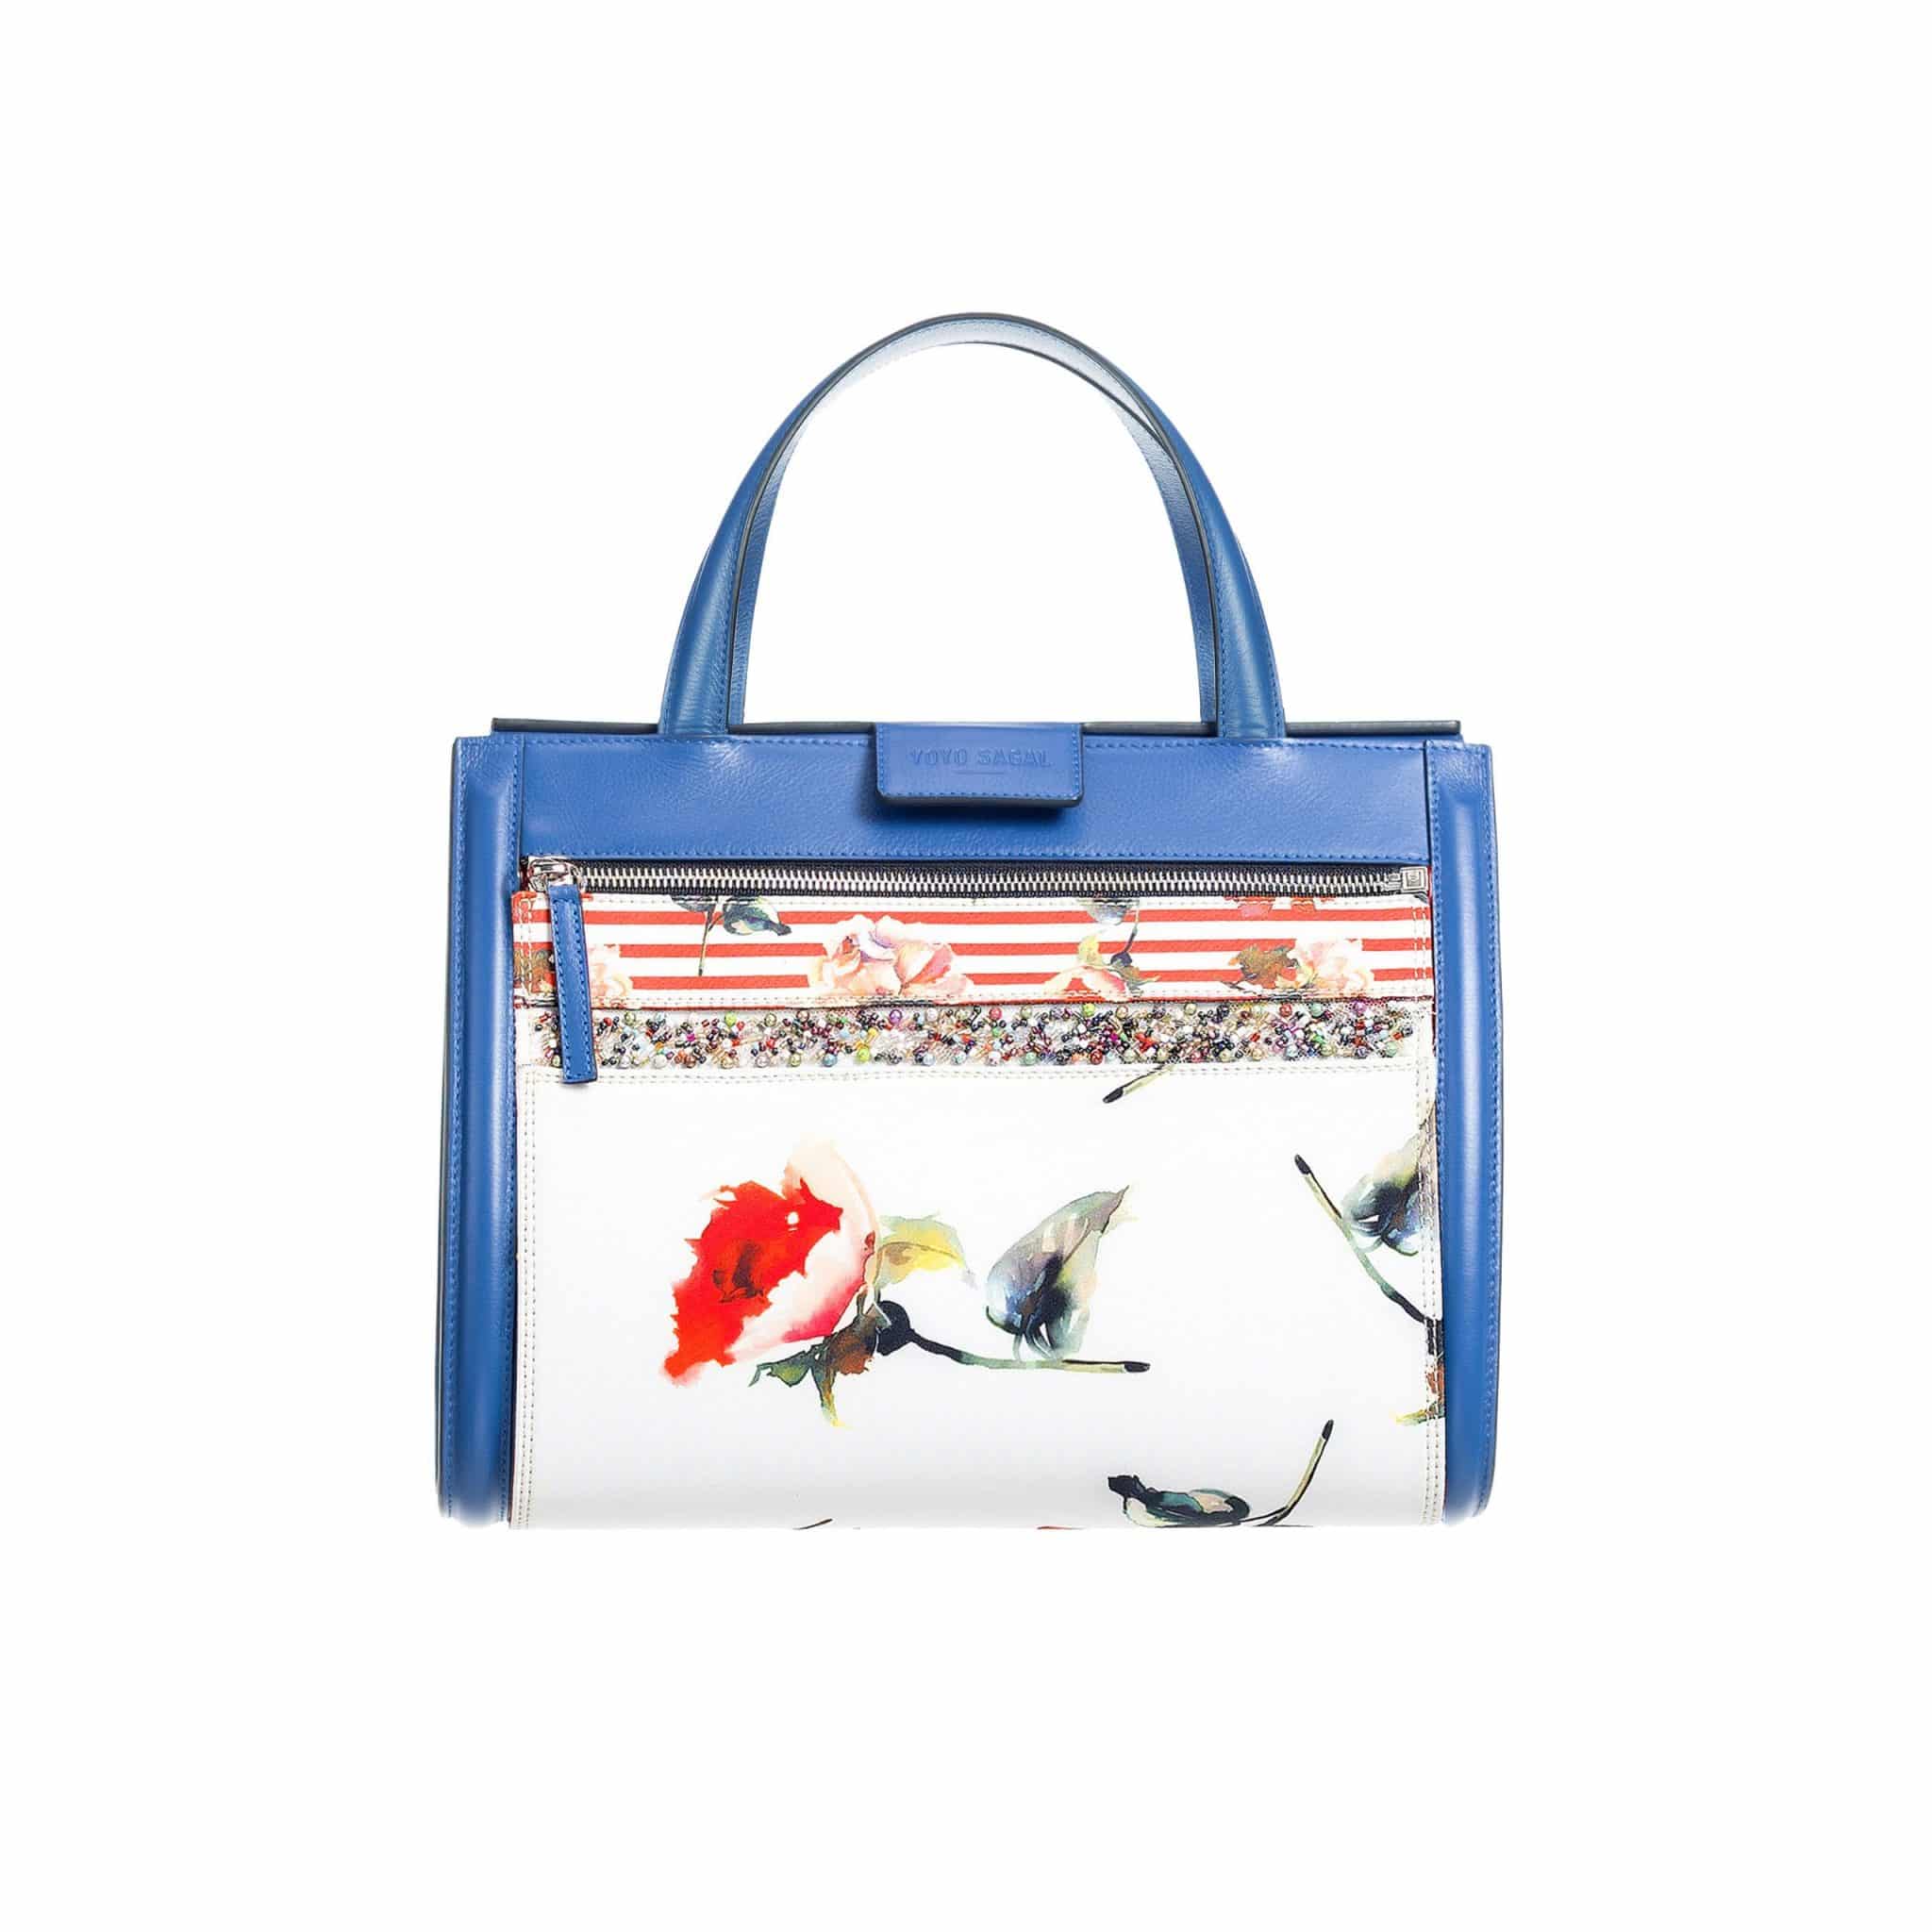 Bolso azul mujer - blue bag with red rose white front- Yoyo Sagal